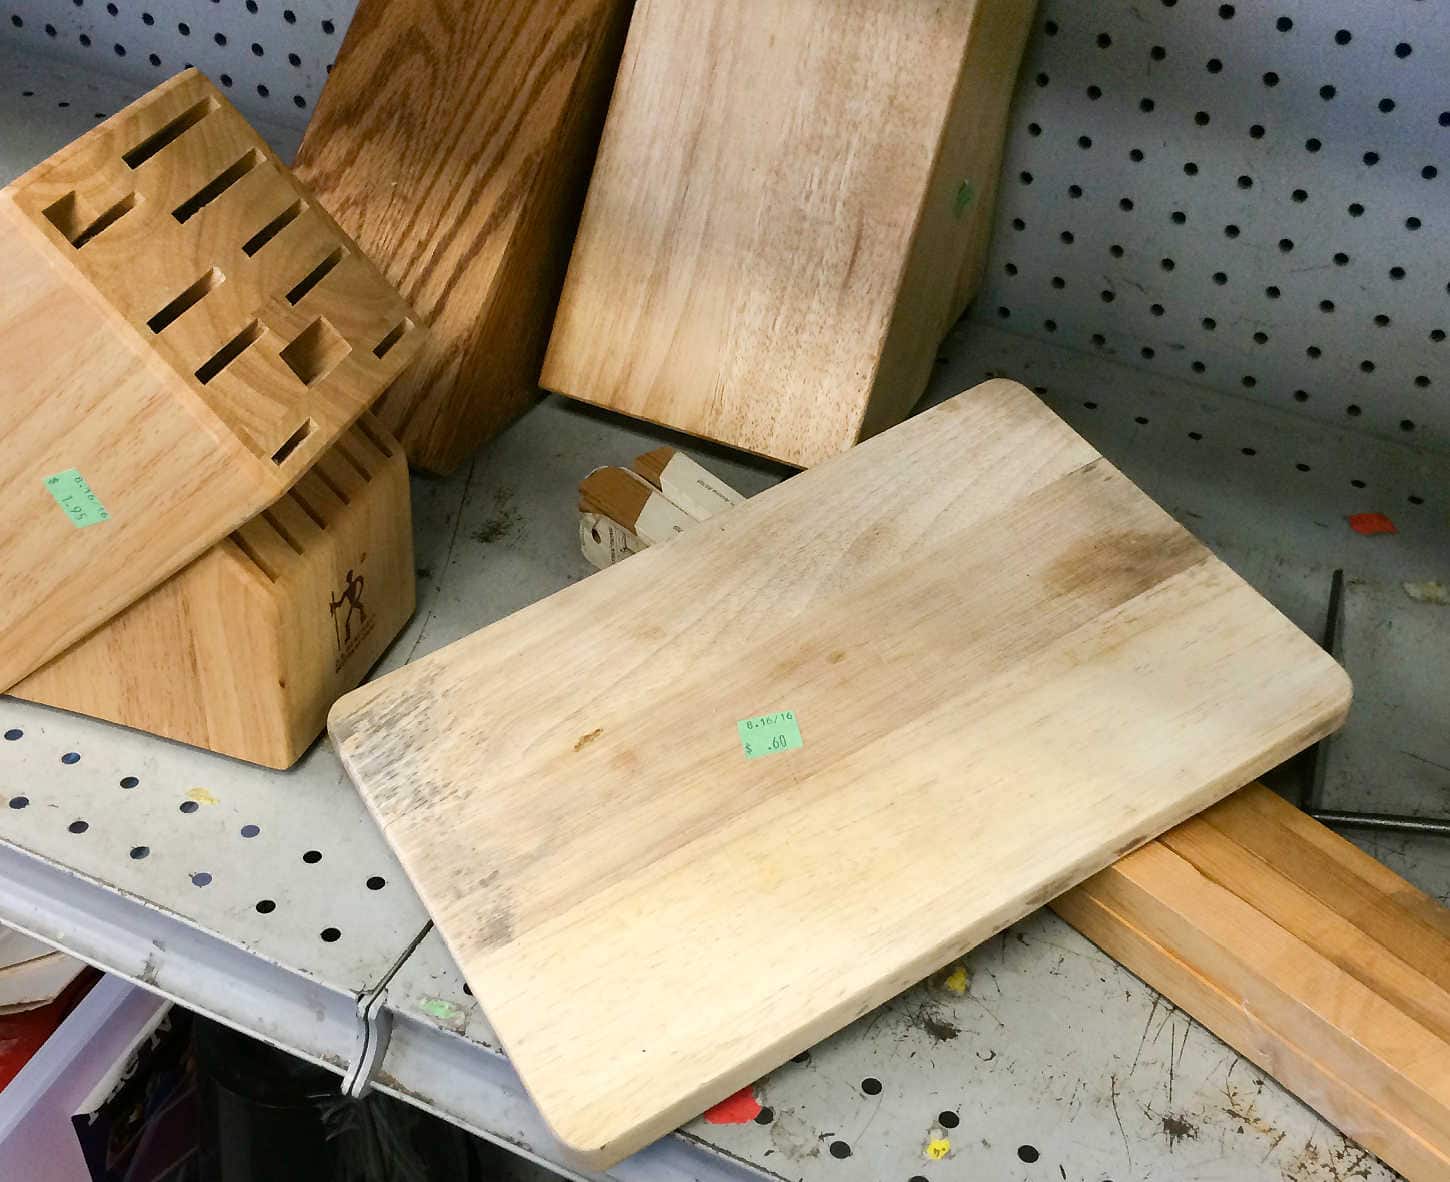 Fabulous Ways to Upcycle Wood Cutting Boards from the Thrift Store